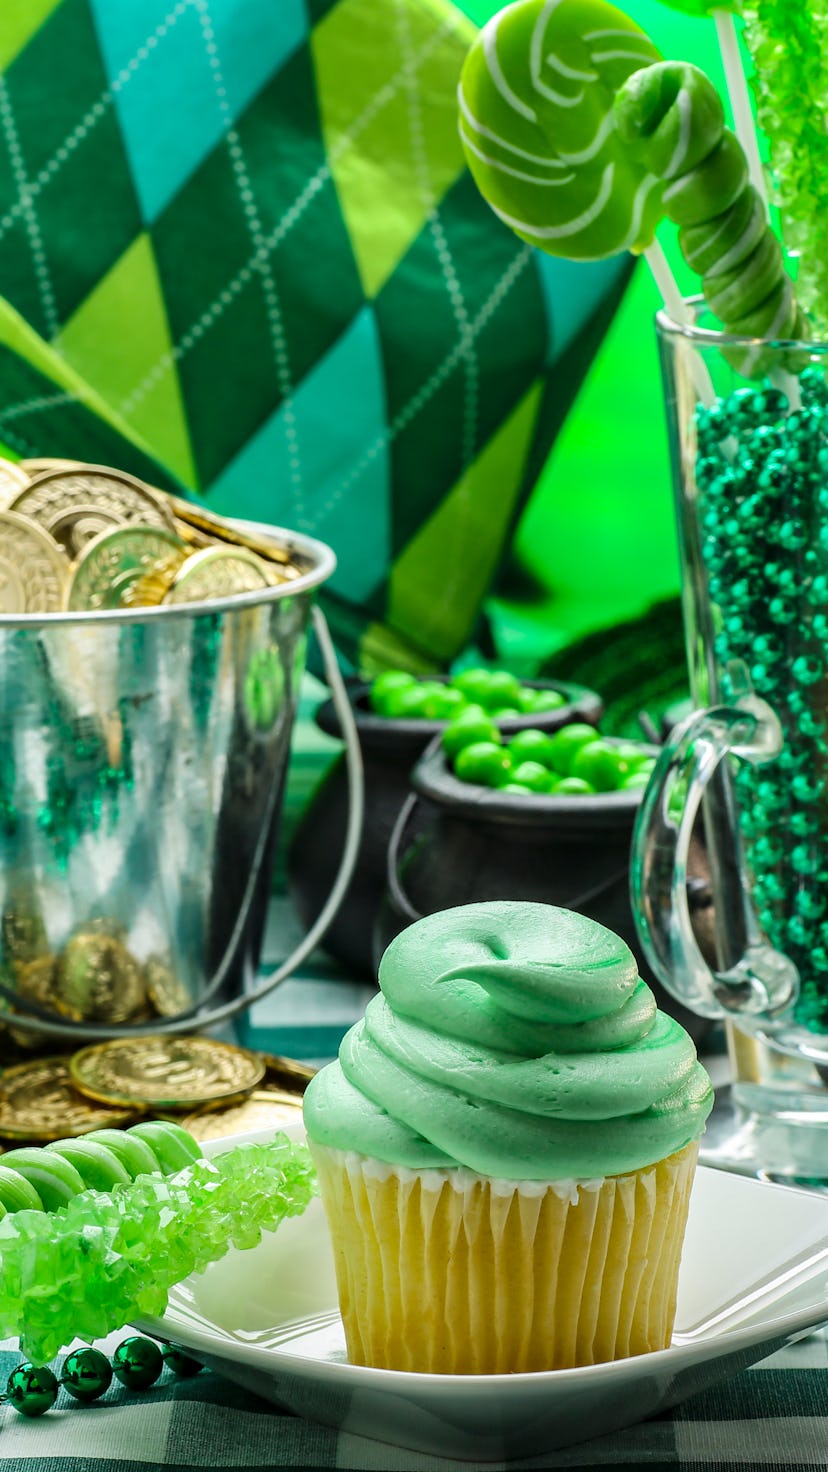 Sweet green treats for St. Patrick's Day are a great way to celebrate.